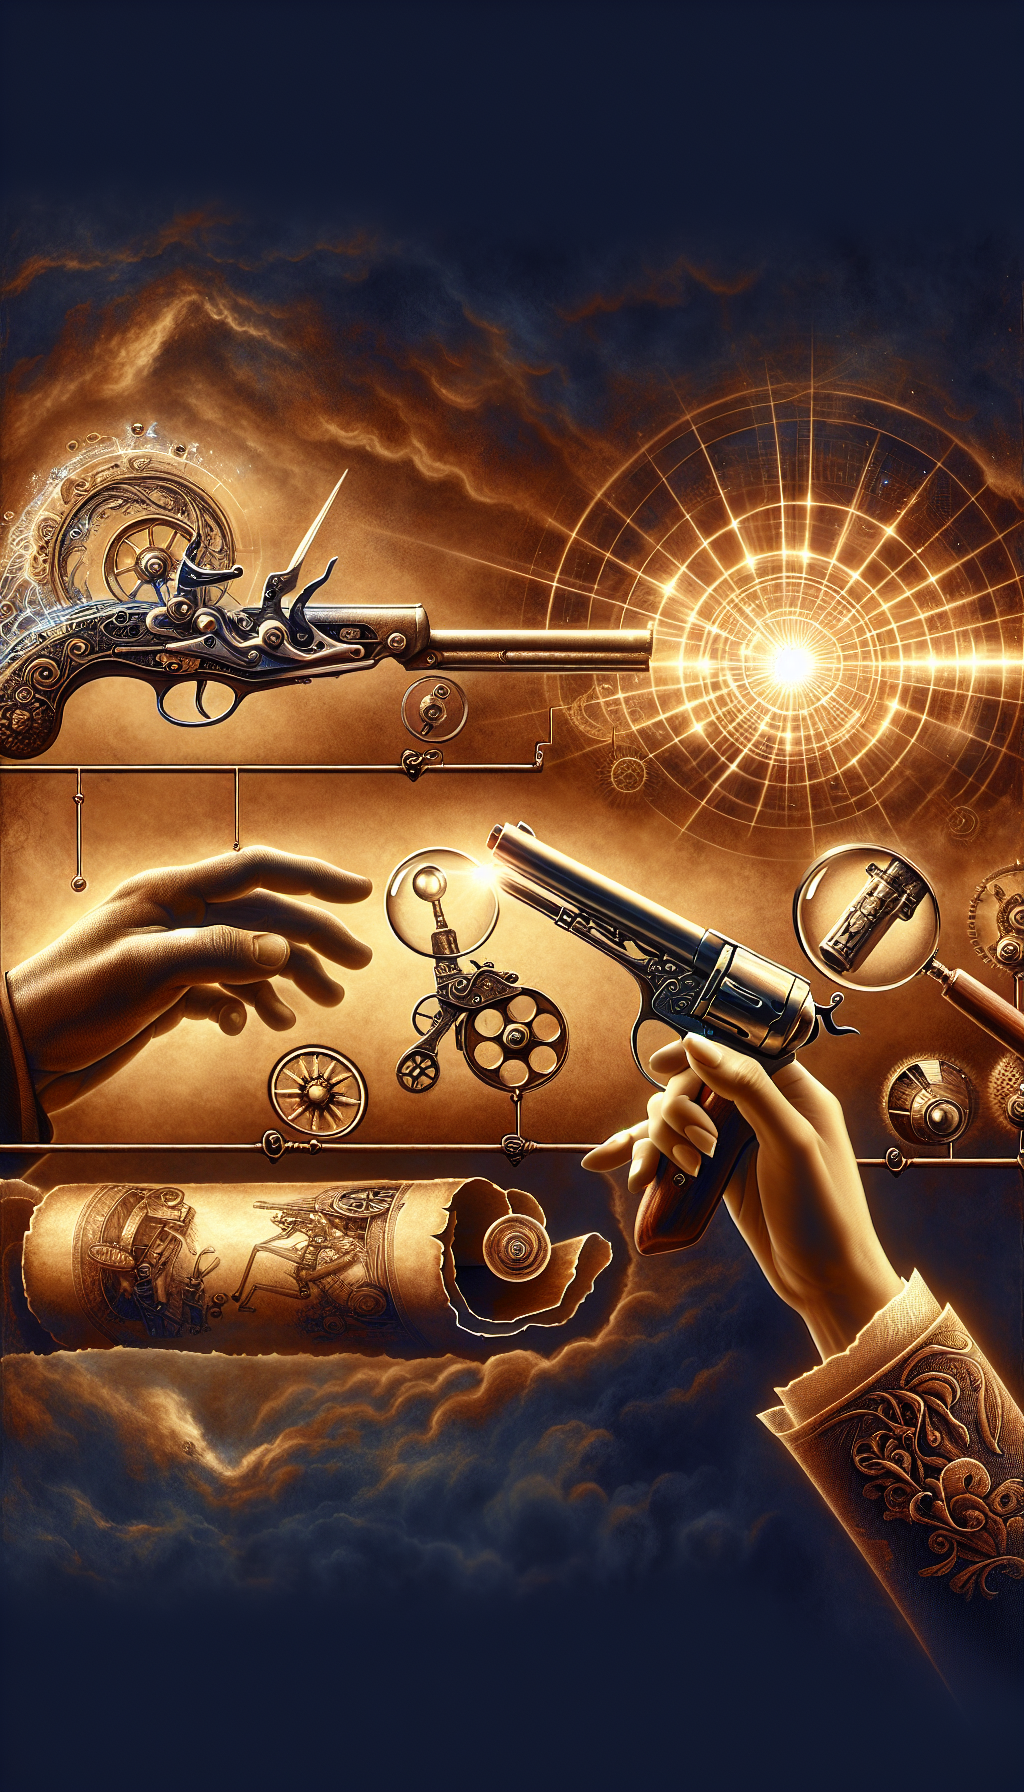 An illustration depicting a timeline with two hands at opposite ends, one holding a flintlock pistol and the other a cap-and-ball revolver, intricately linked by a flowing scroll labeled with key identification features of antique pistols. Above the scroll hover magnifying glasses focusing on unique mechanisms, their glints merging into a spectrum symbolizing the transition between eras in pistol development.